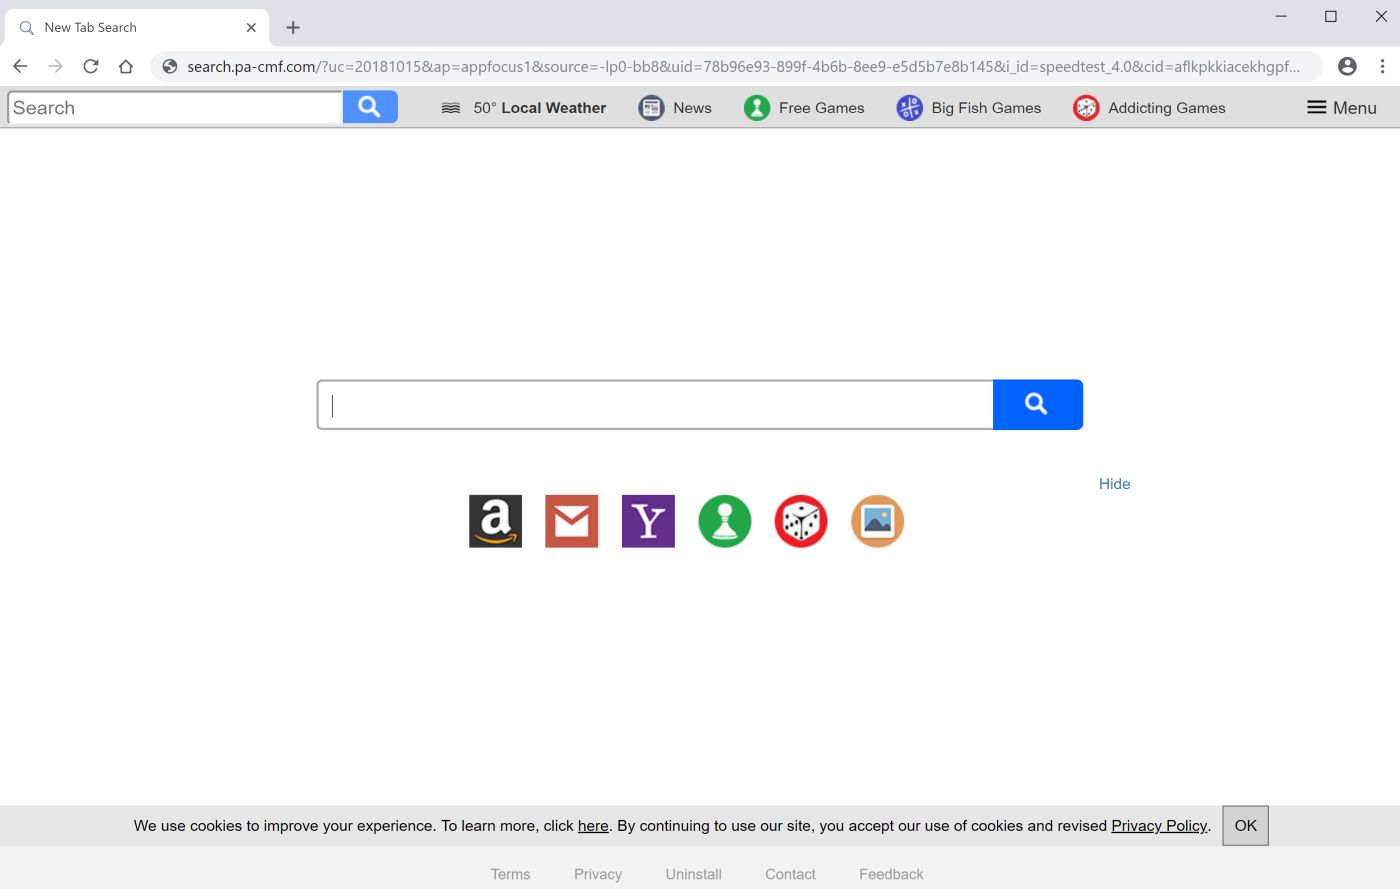 11517574121chrome://New-Tab-Page-third-Party.